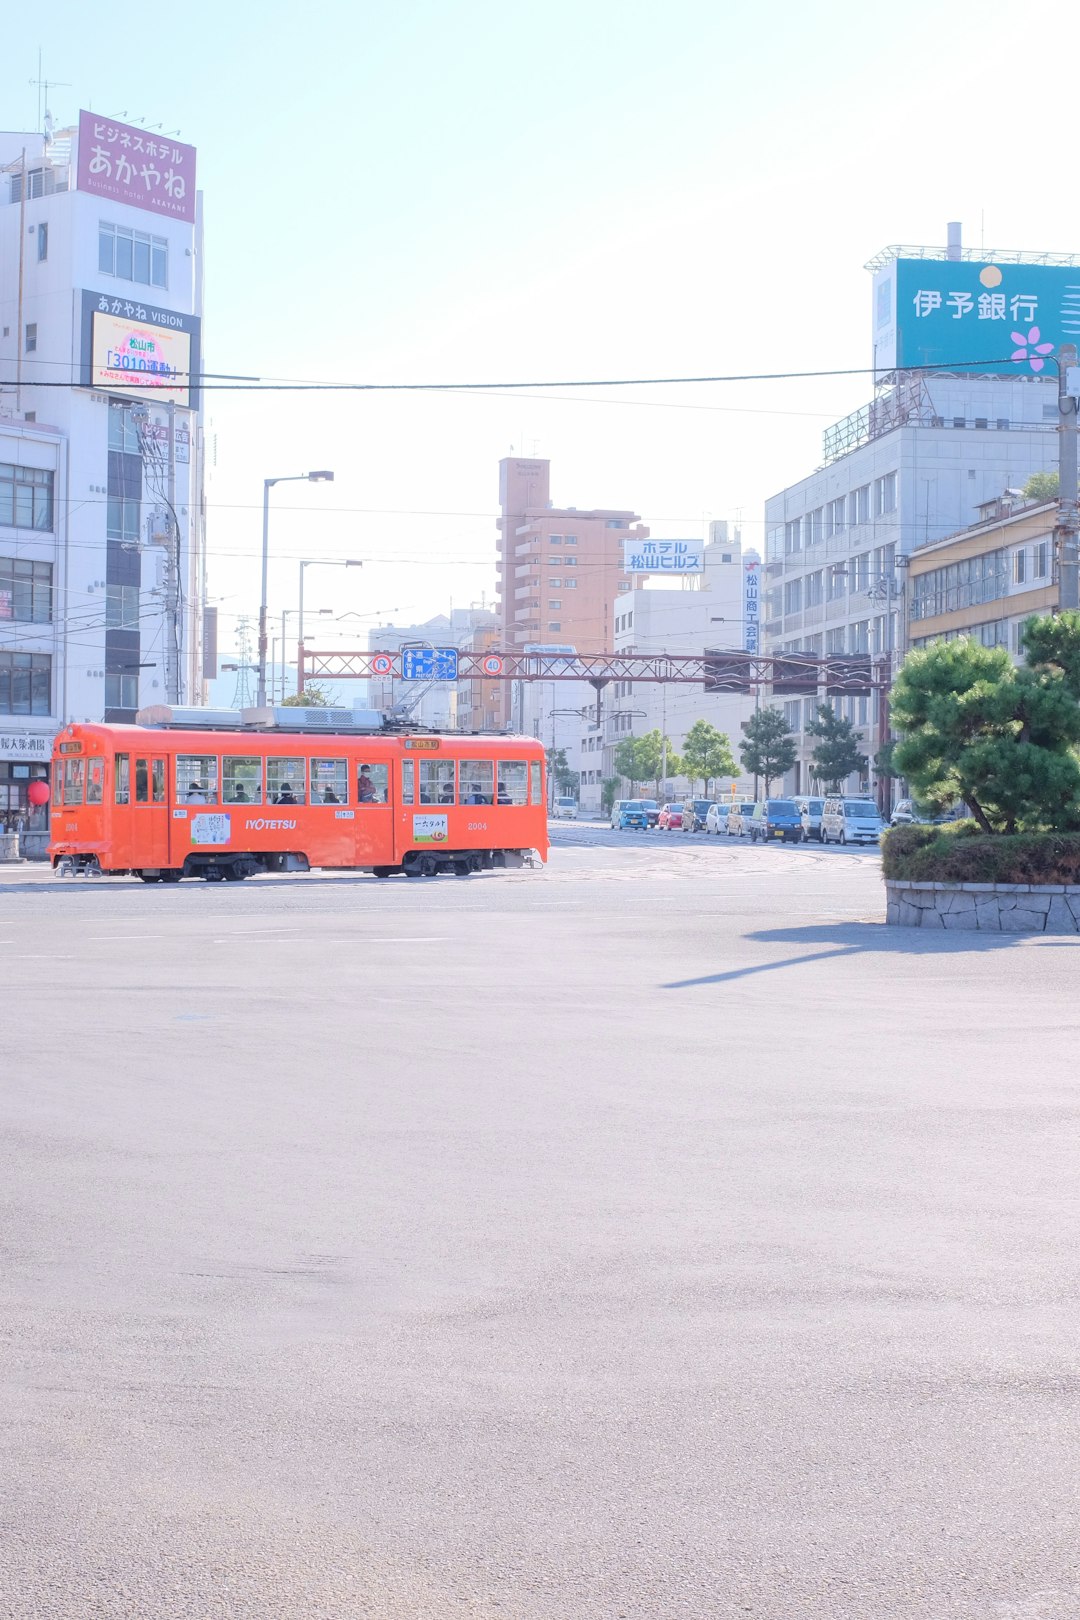 red bus on road near building during daytime